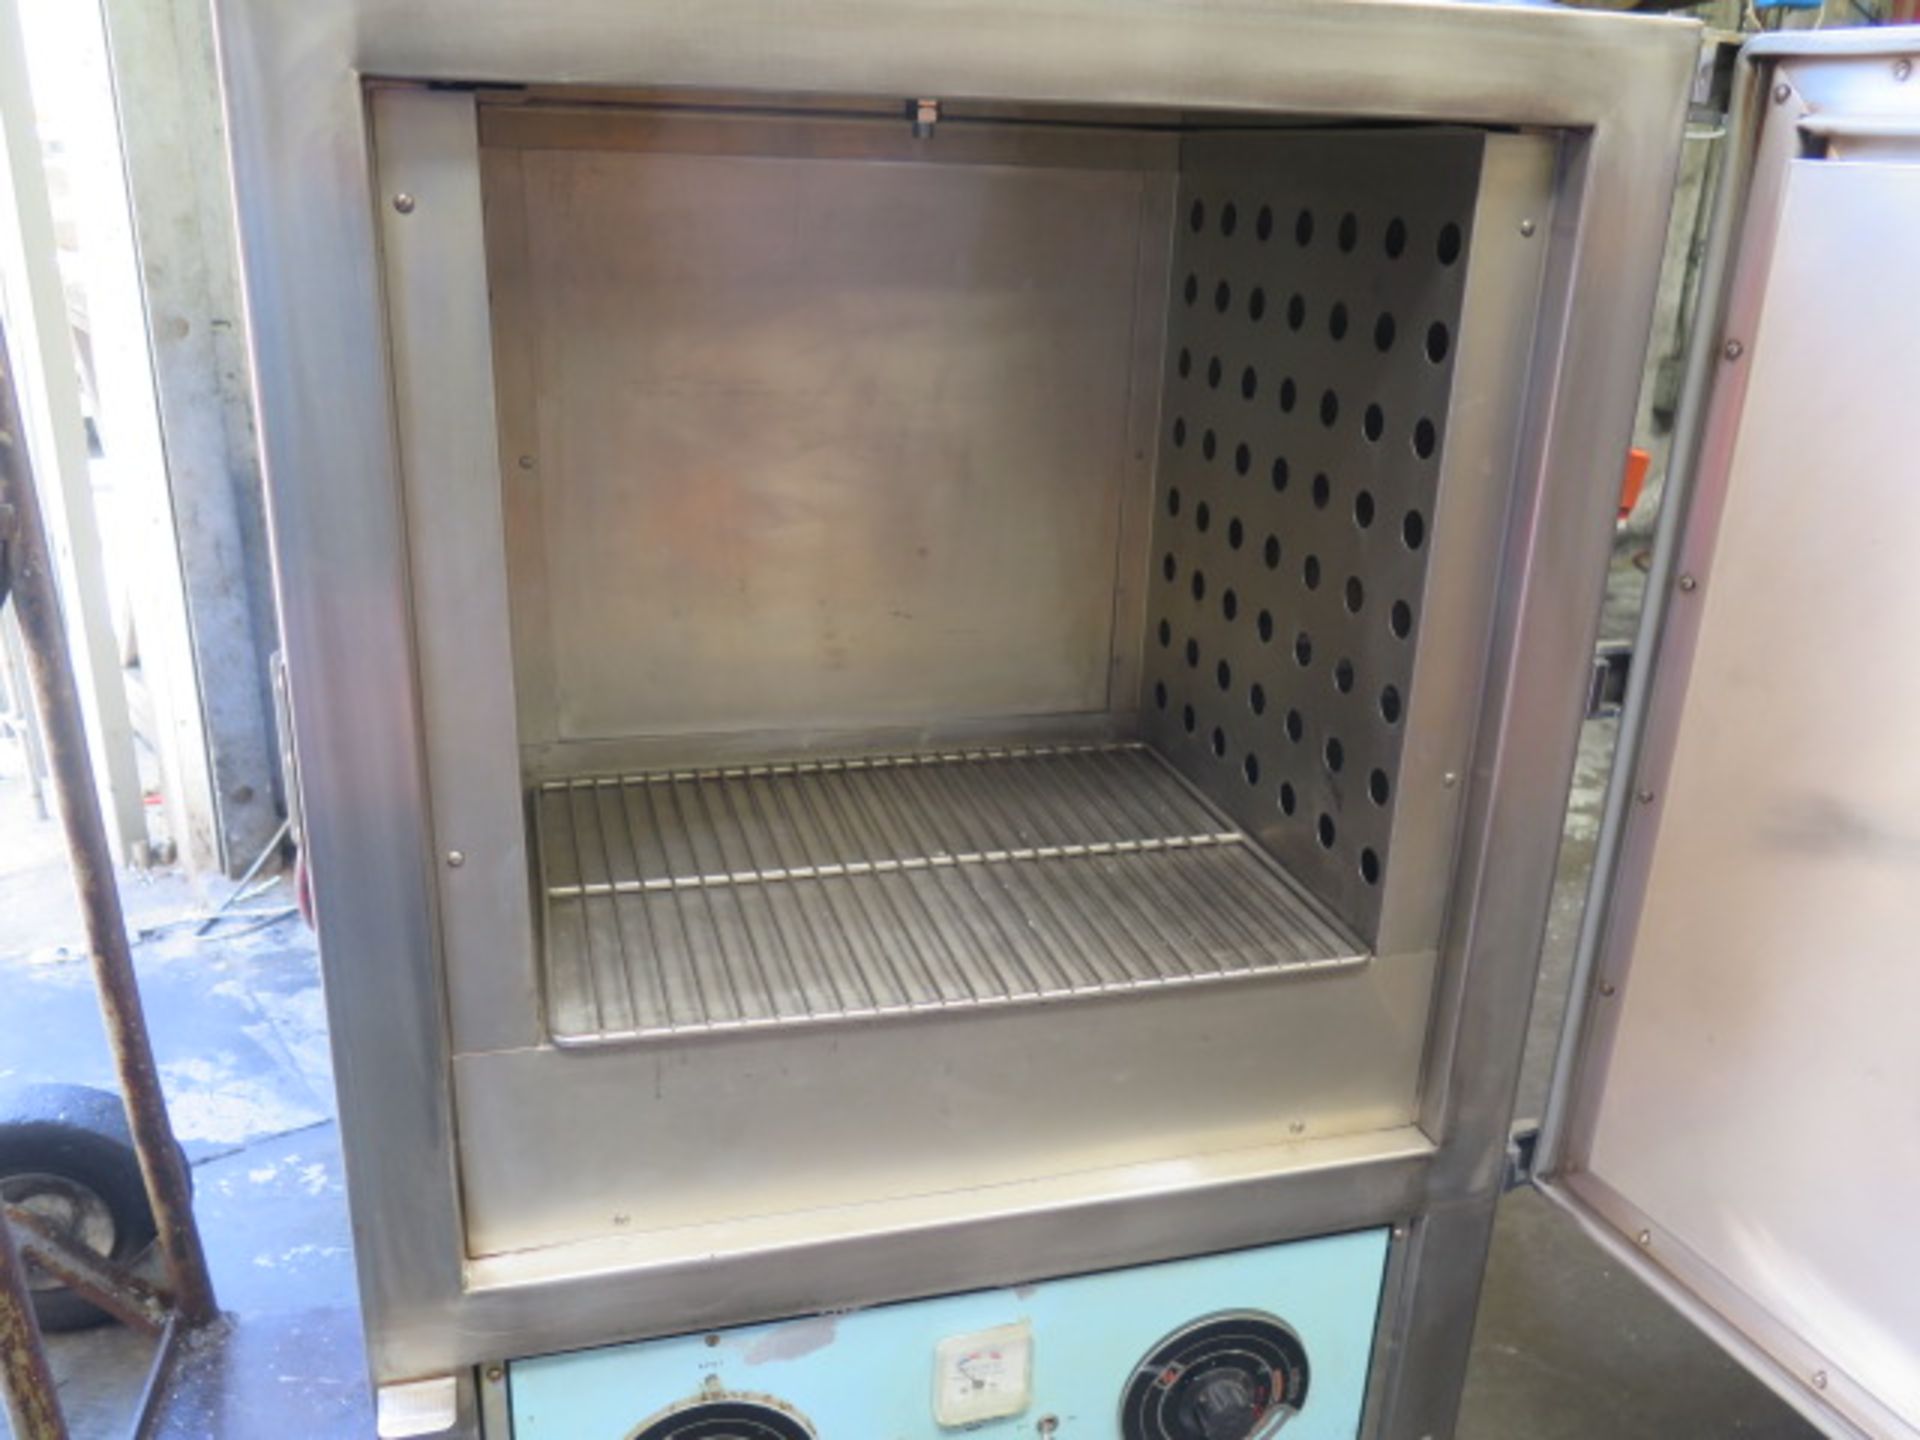 Blue-M OV-510A-2 38C to 260C / 500 Deg F Electric Oven s/n OV3-14172 (SOLD AS-IS - NO WARRANTY) - Image 5 of 6